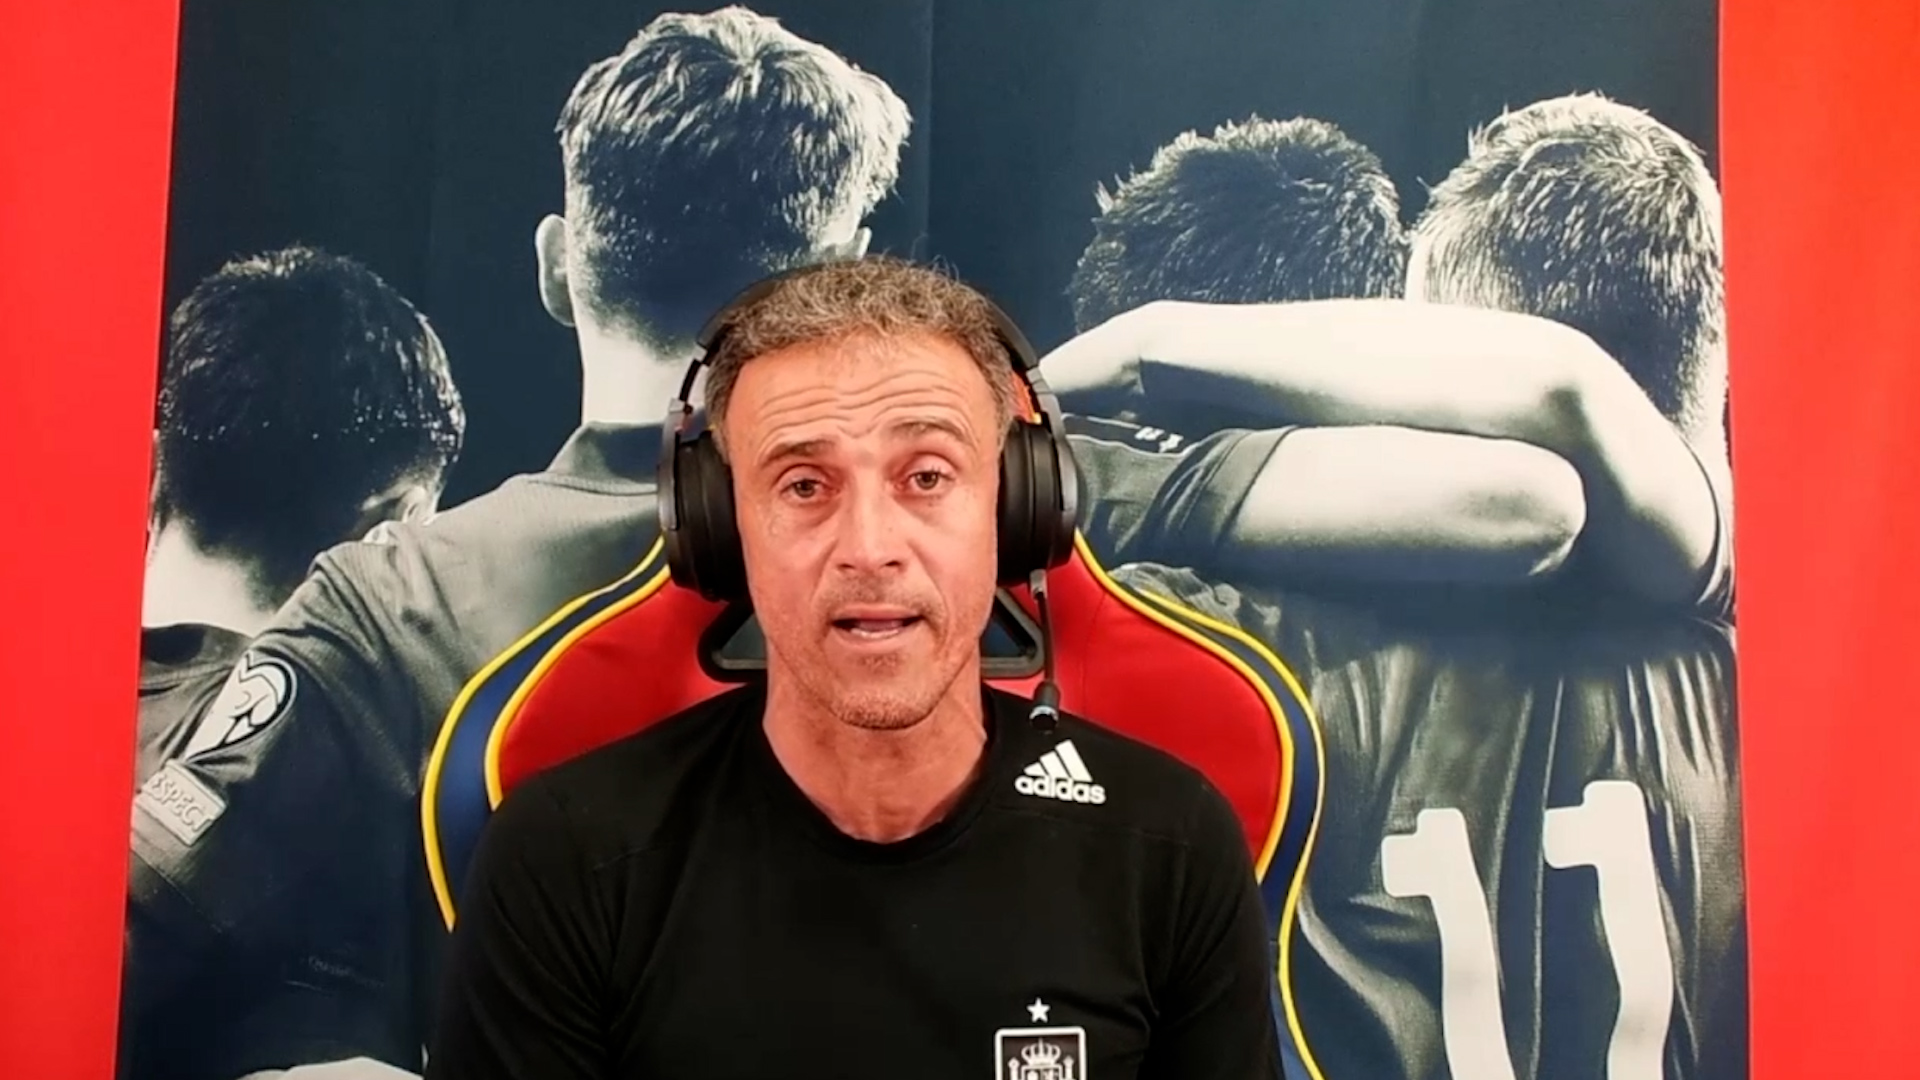 The Spanish coach is among the 10 most watched streamers on Twitch